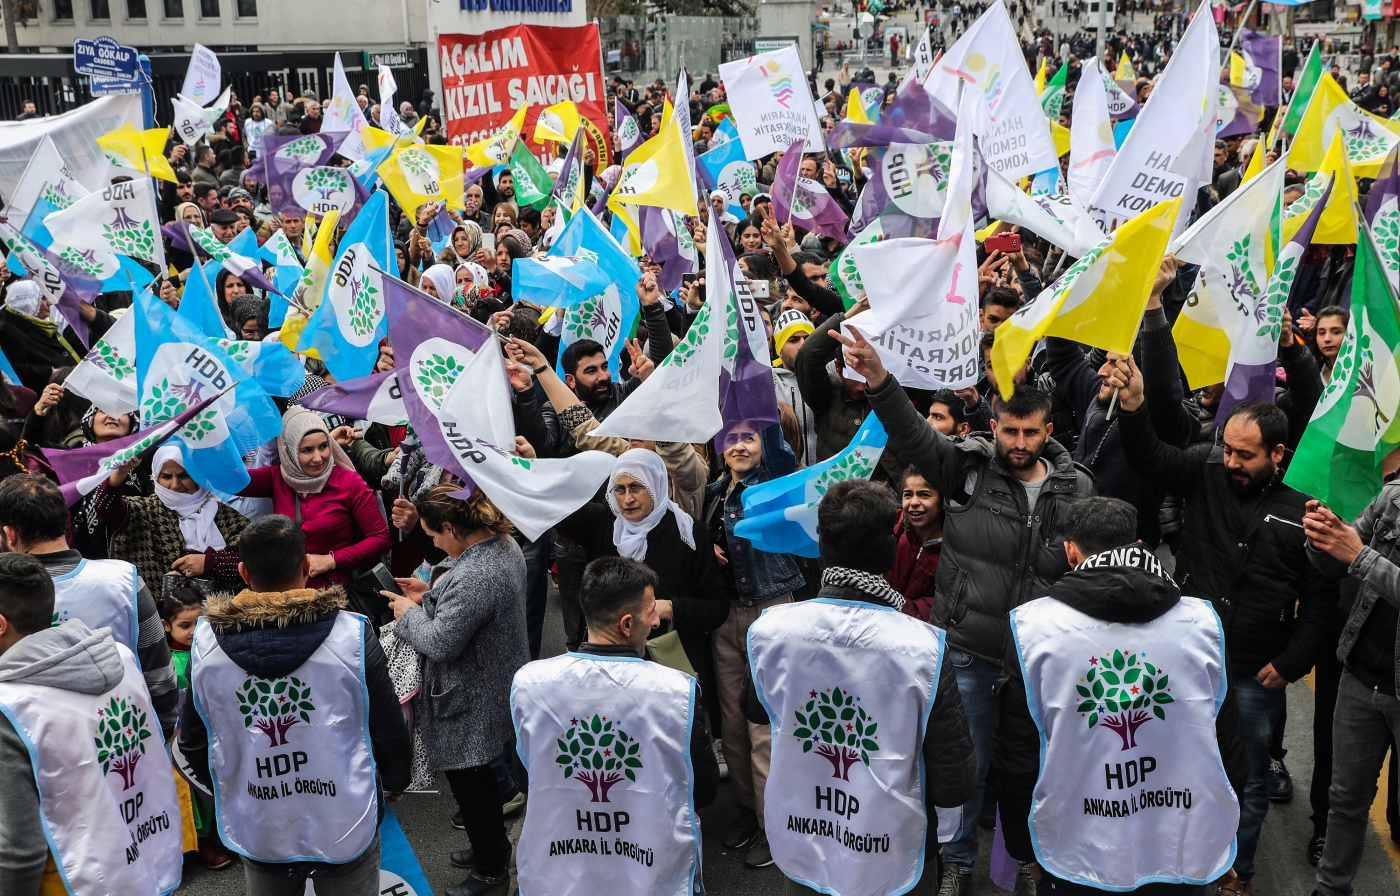 HDP supporters rally